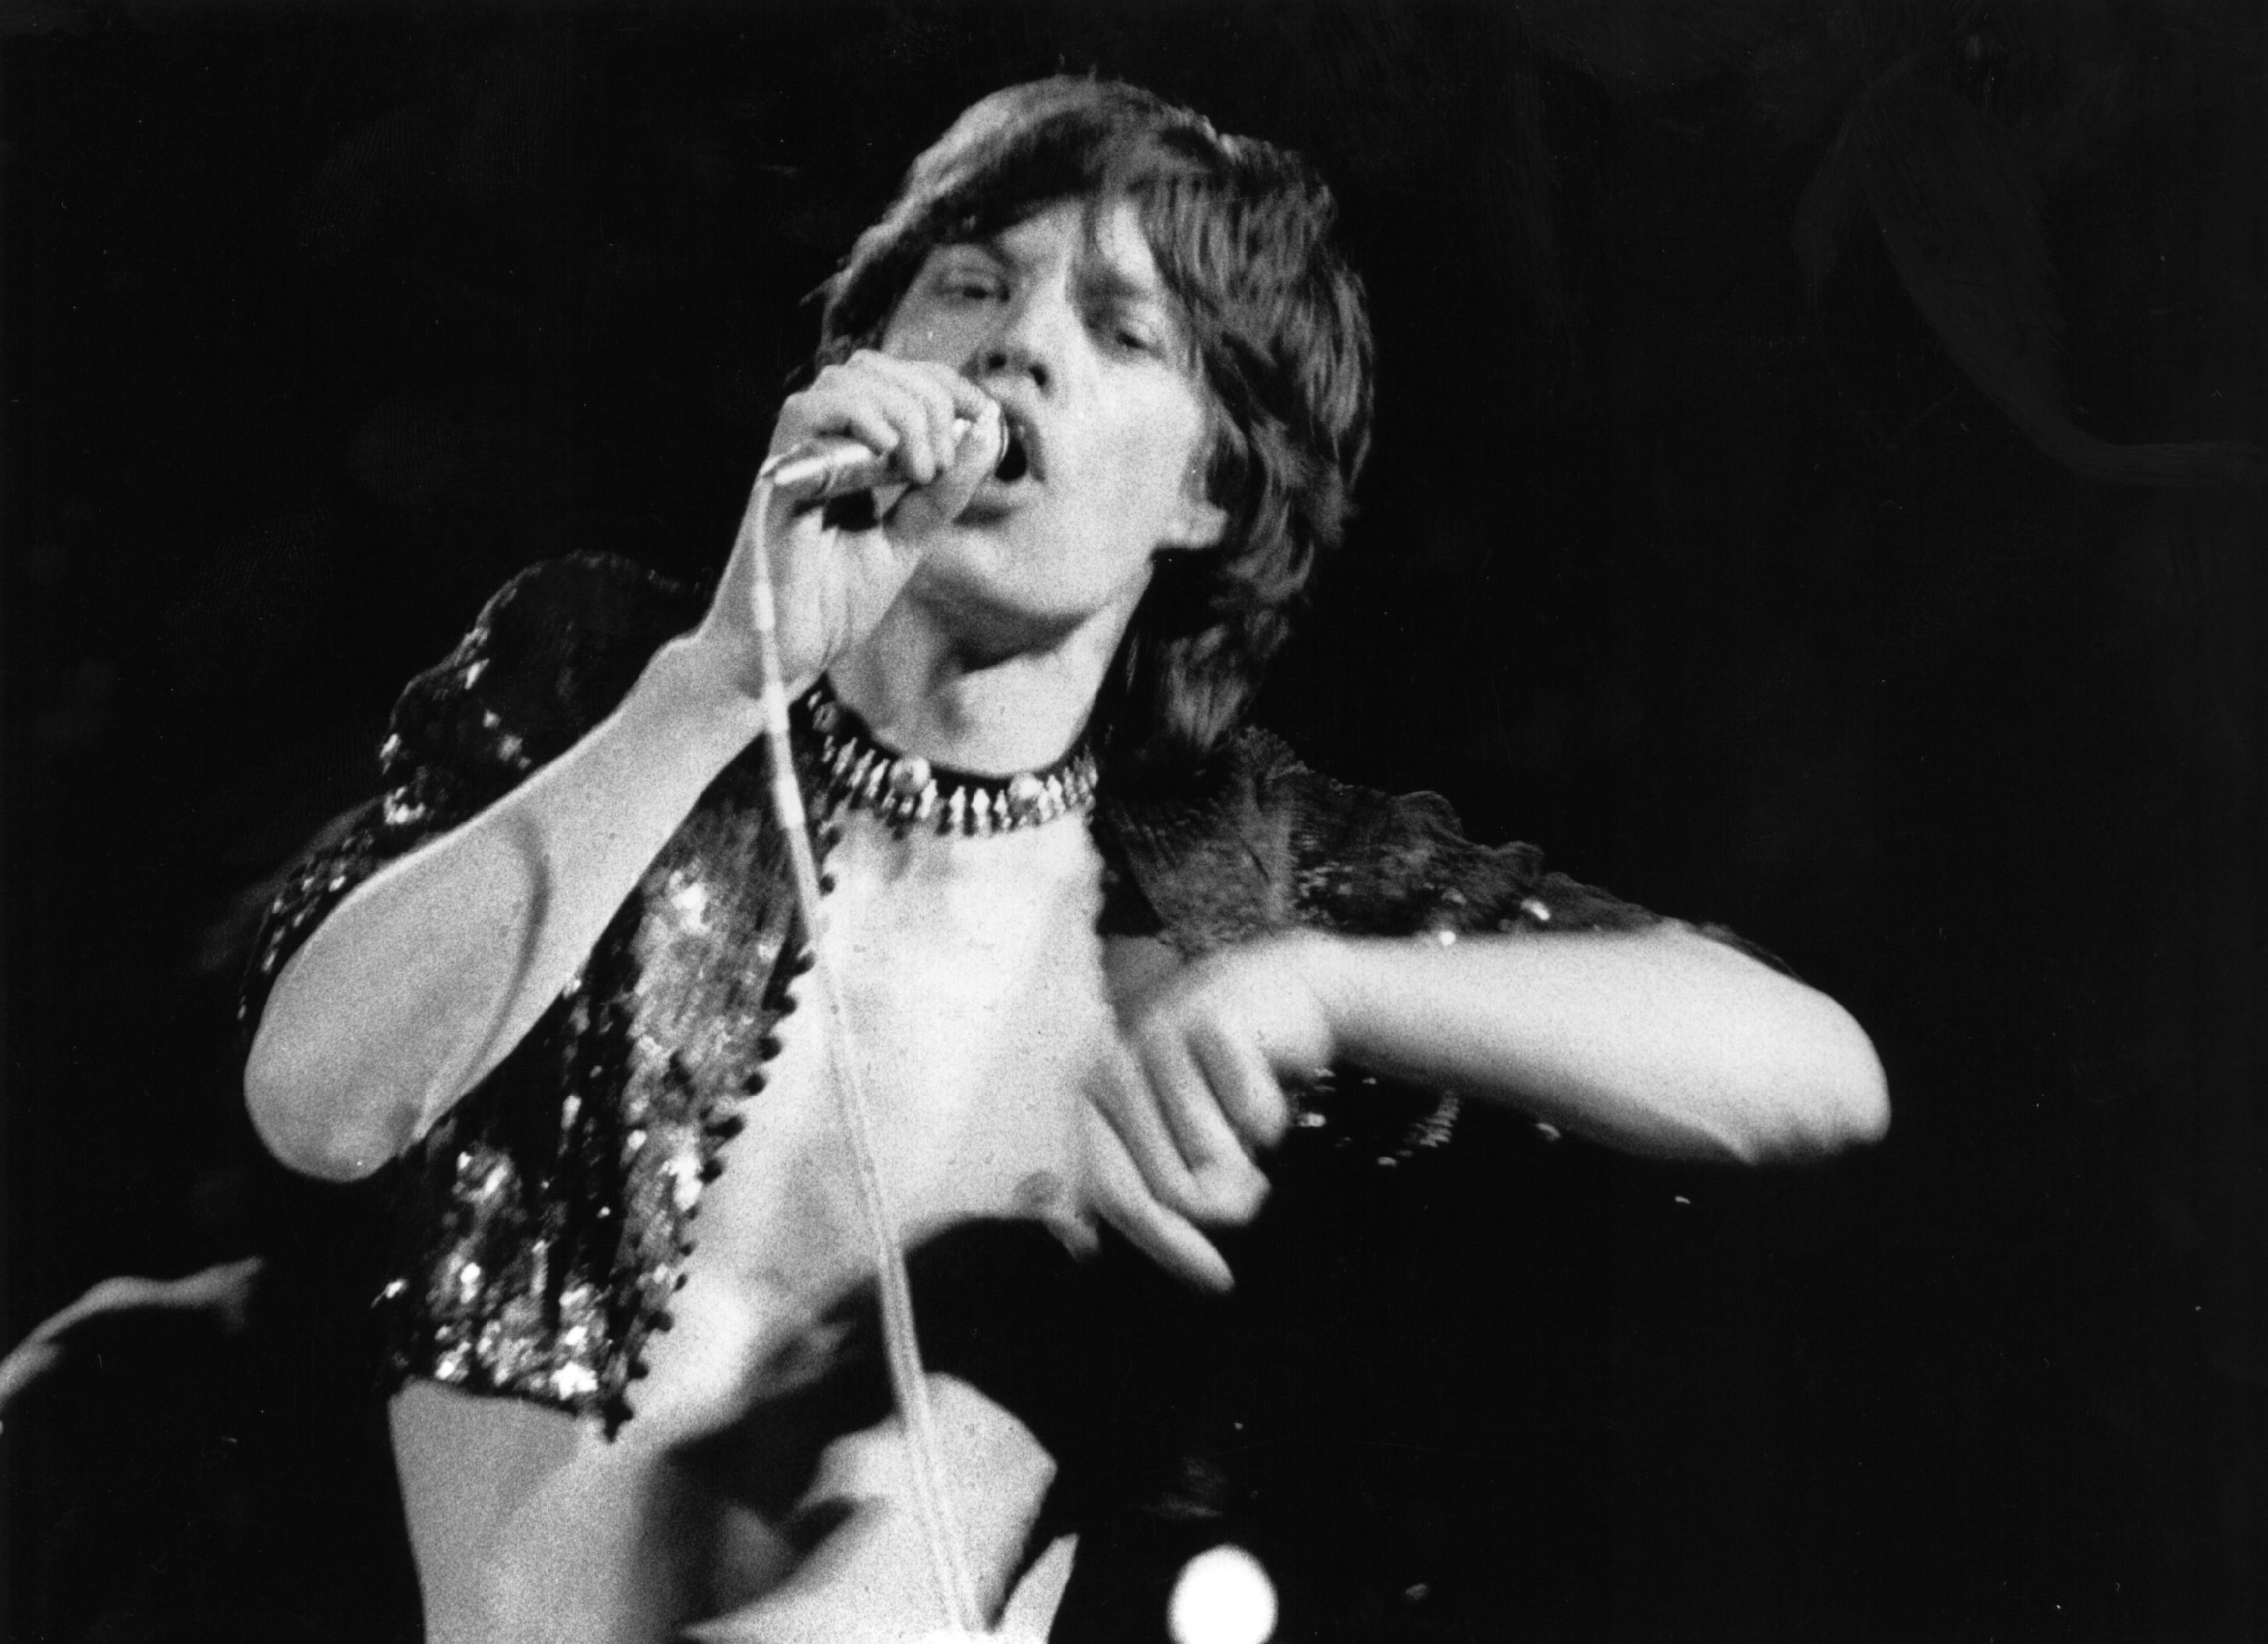 Mick Jagger of The Rolling Stones singing songs into a microphone